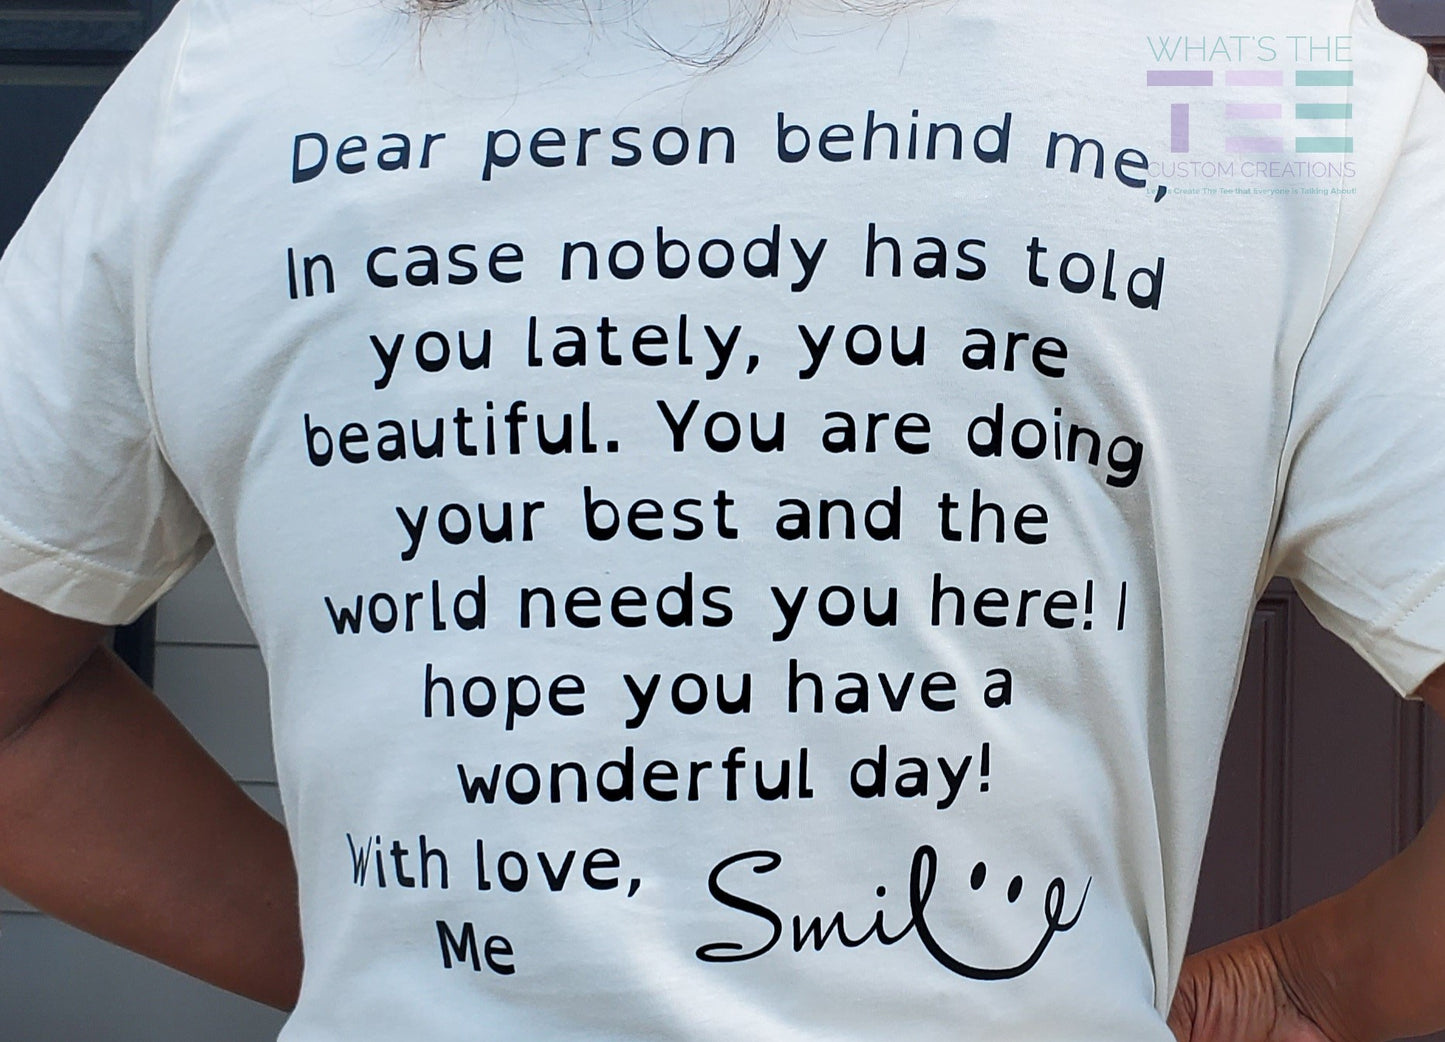 Inspirational tee to make the person behind you smile